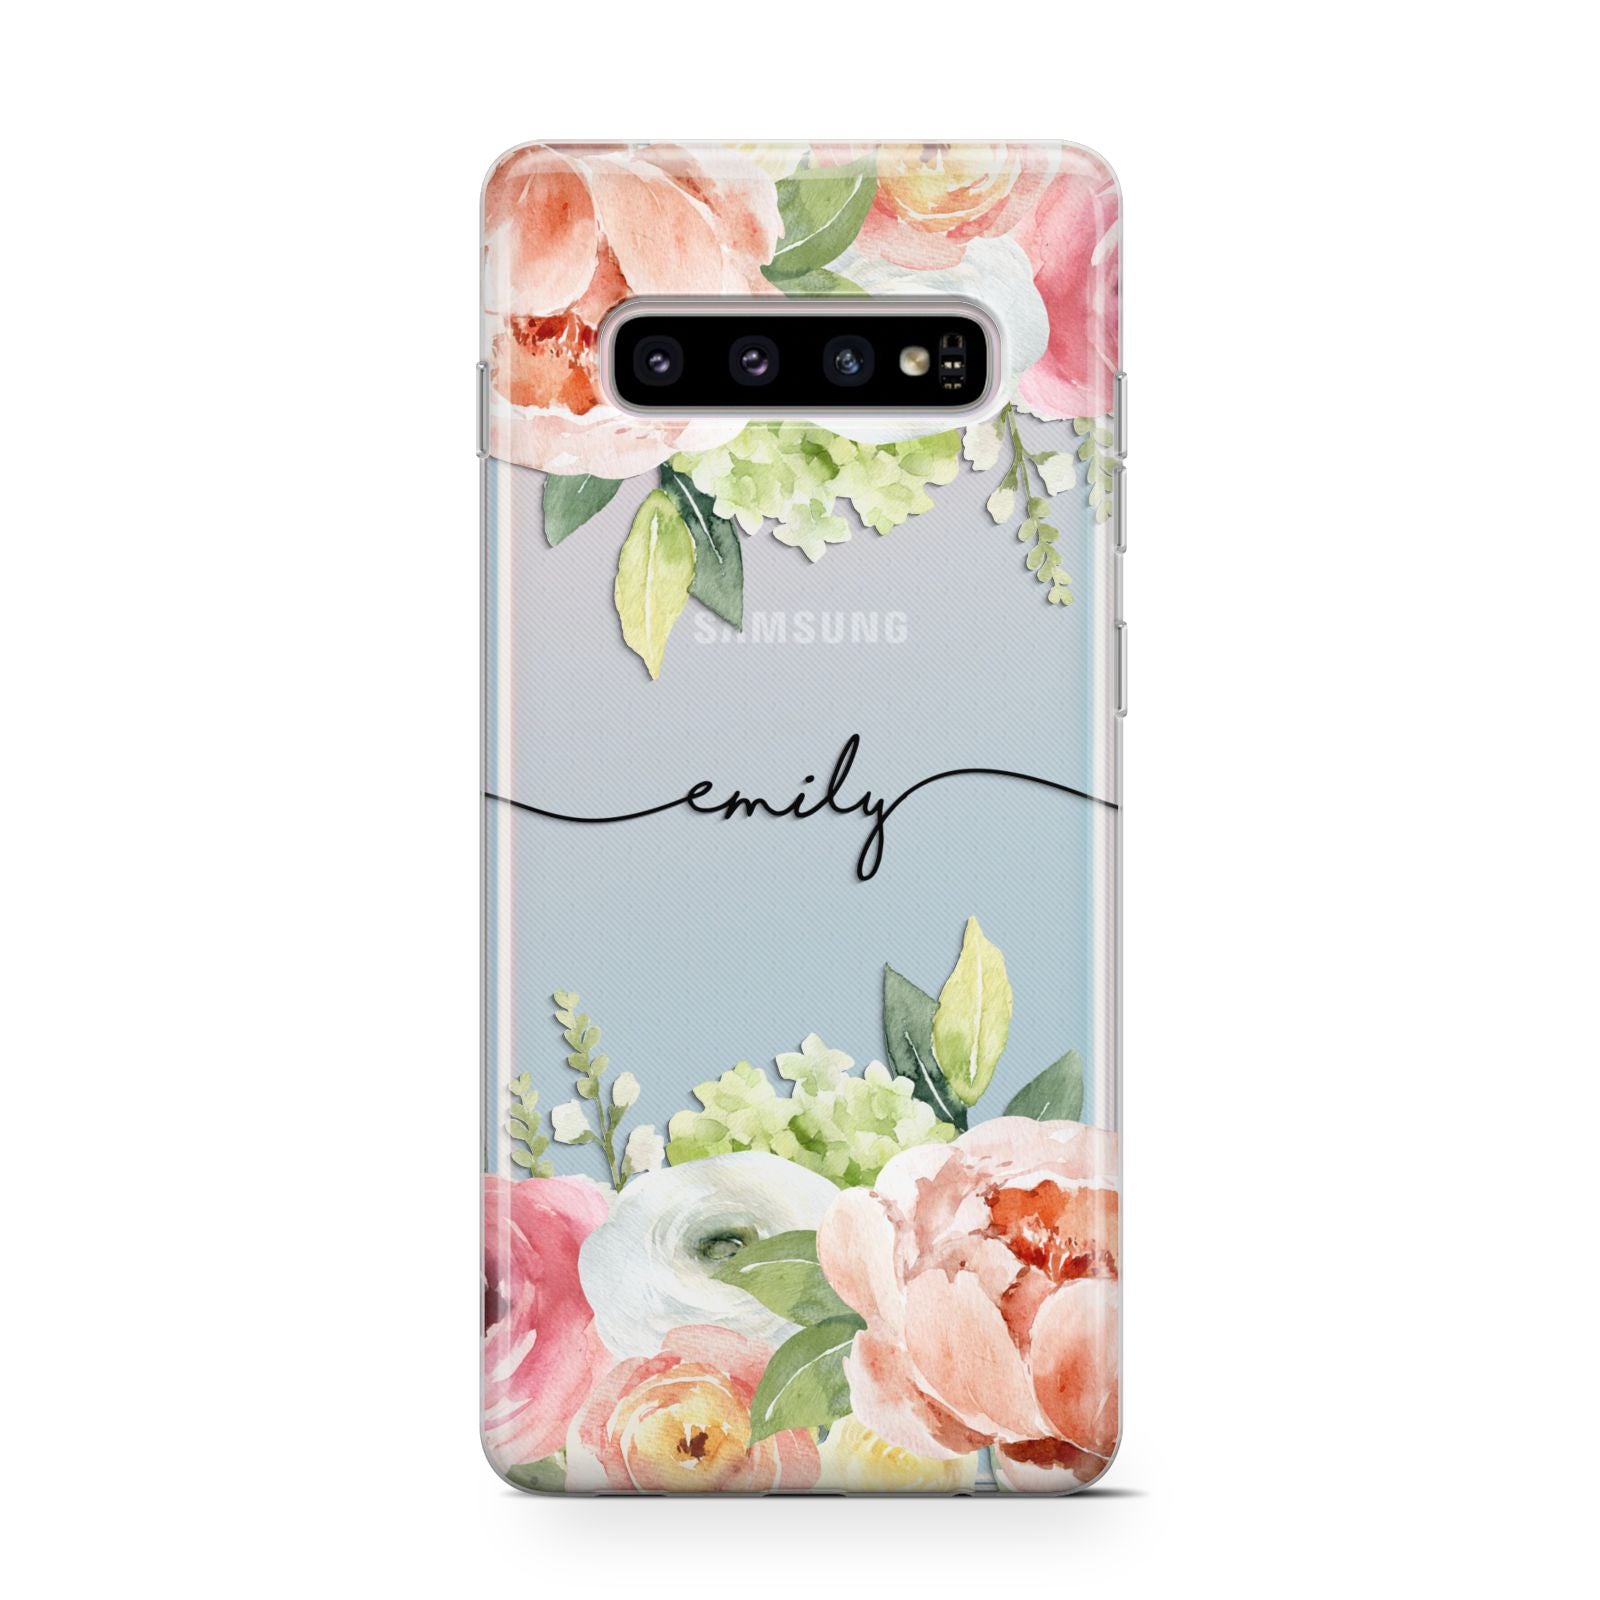 Personalised Flowers Samsung Galaxy S10 Case